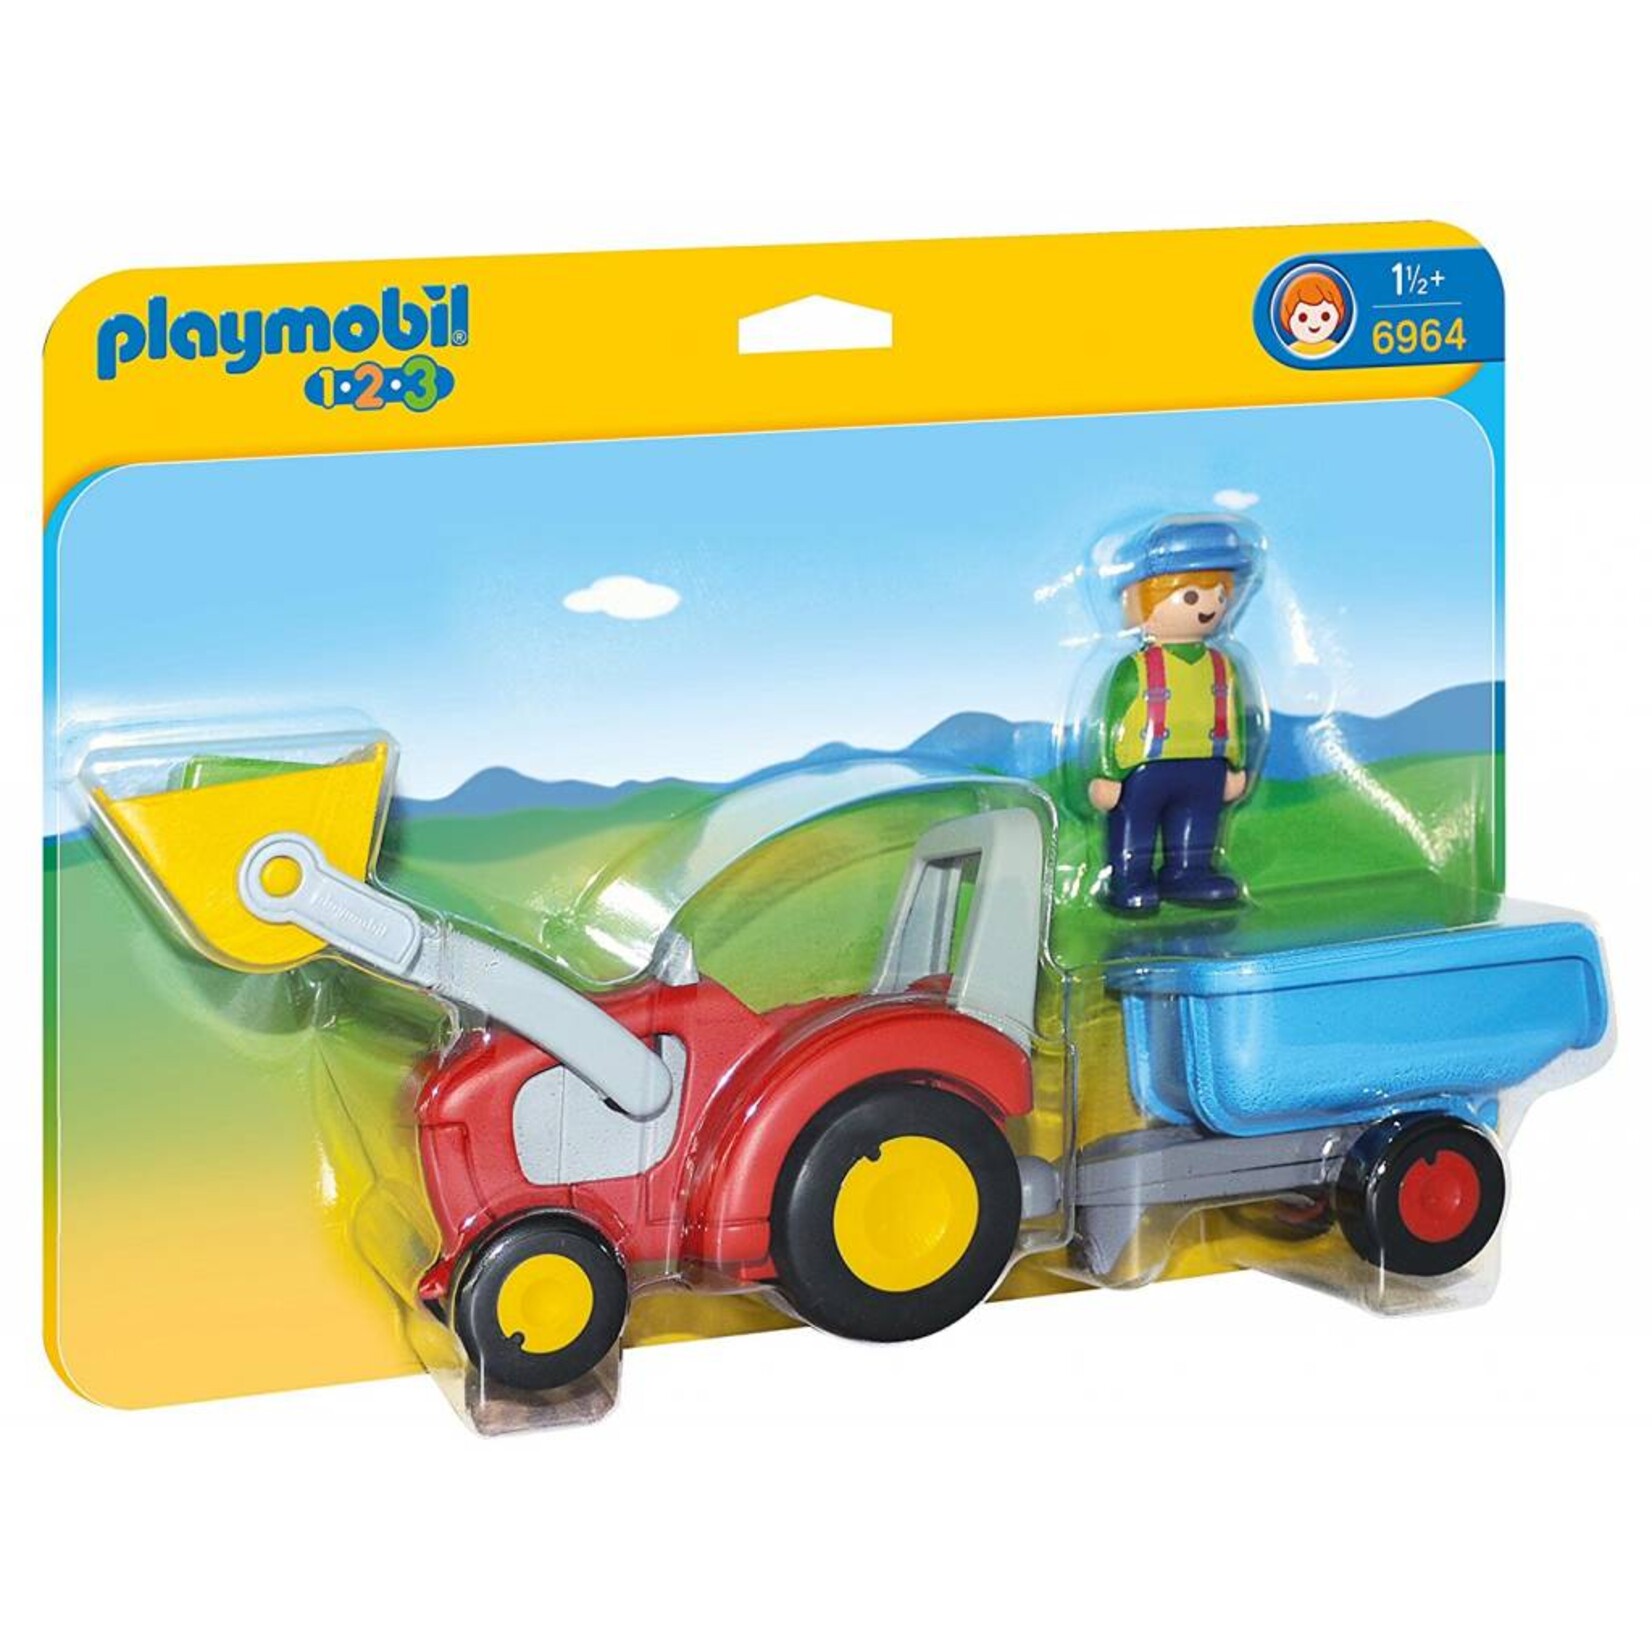 Playmobil 1.2.3 Tractor with Trailer